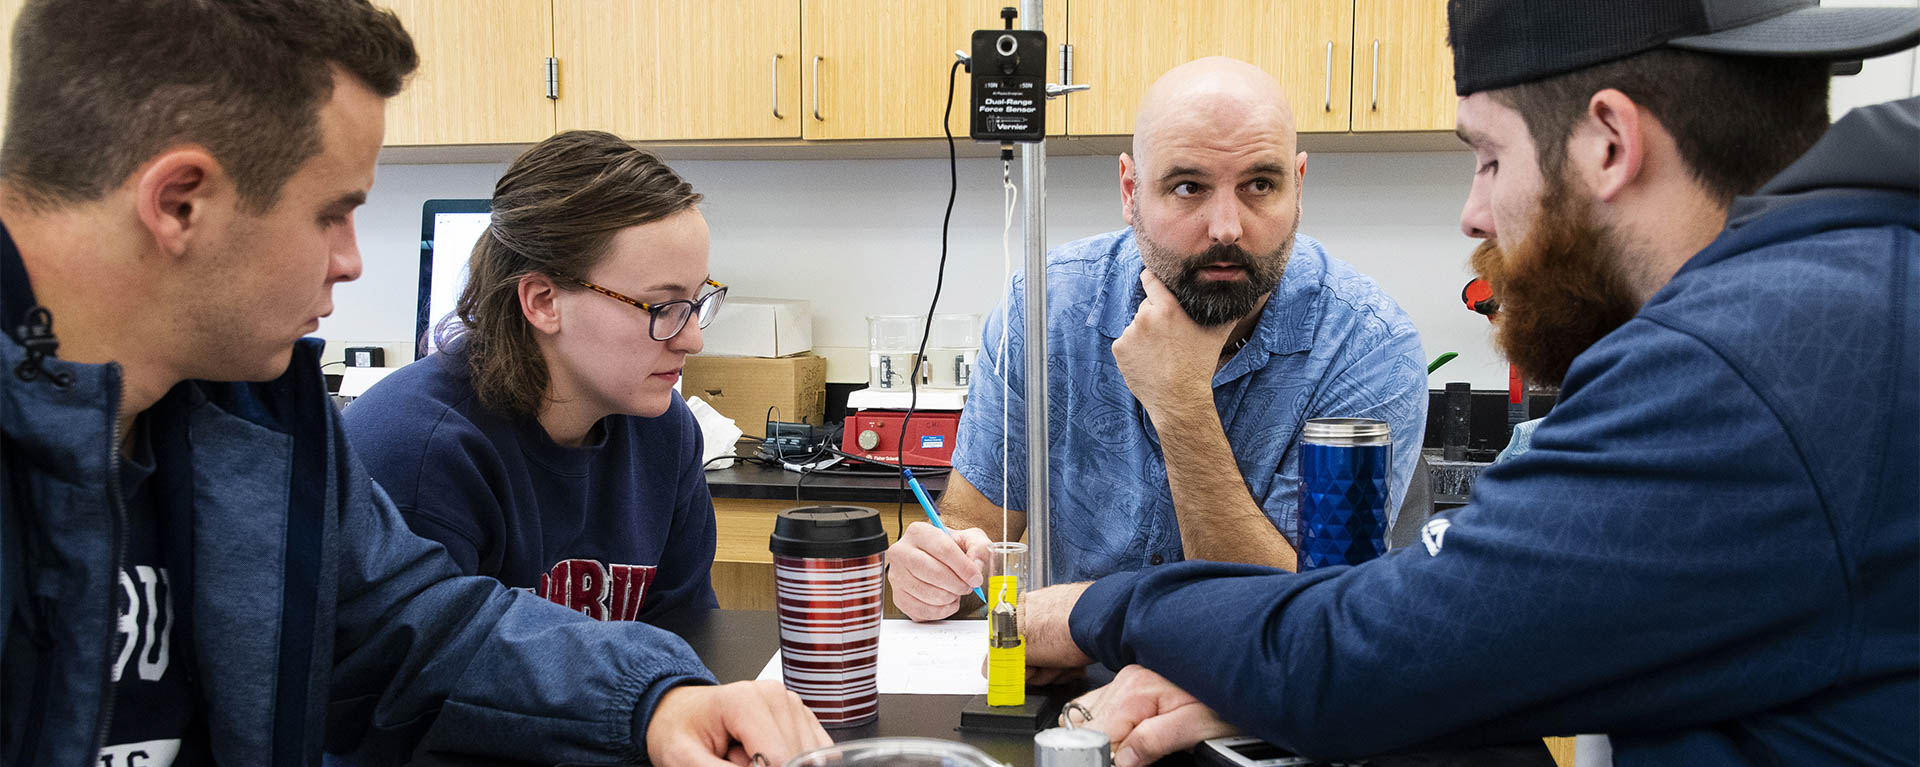 A physics professor and group of students discuss an experiment in the lab.